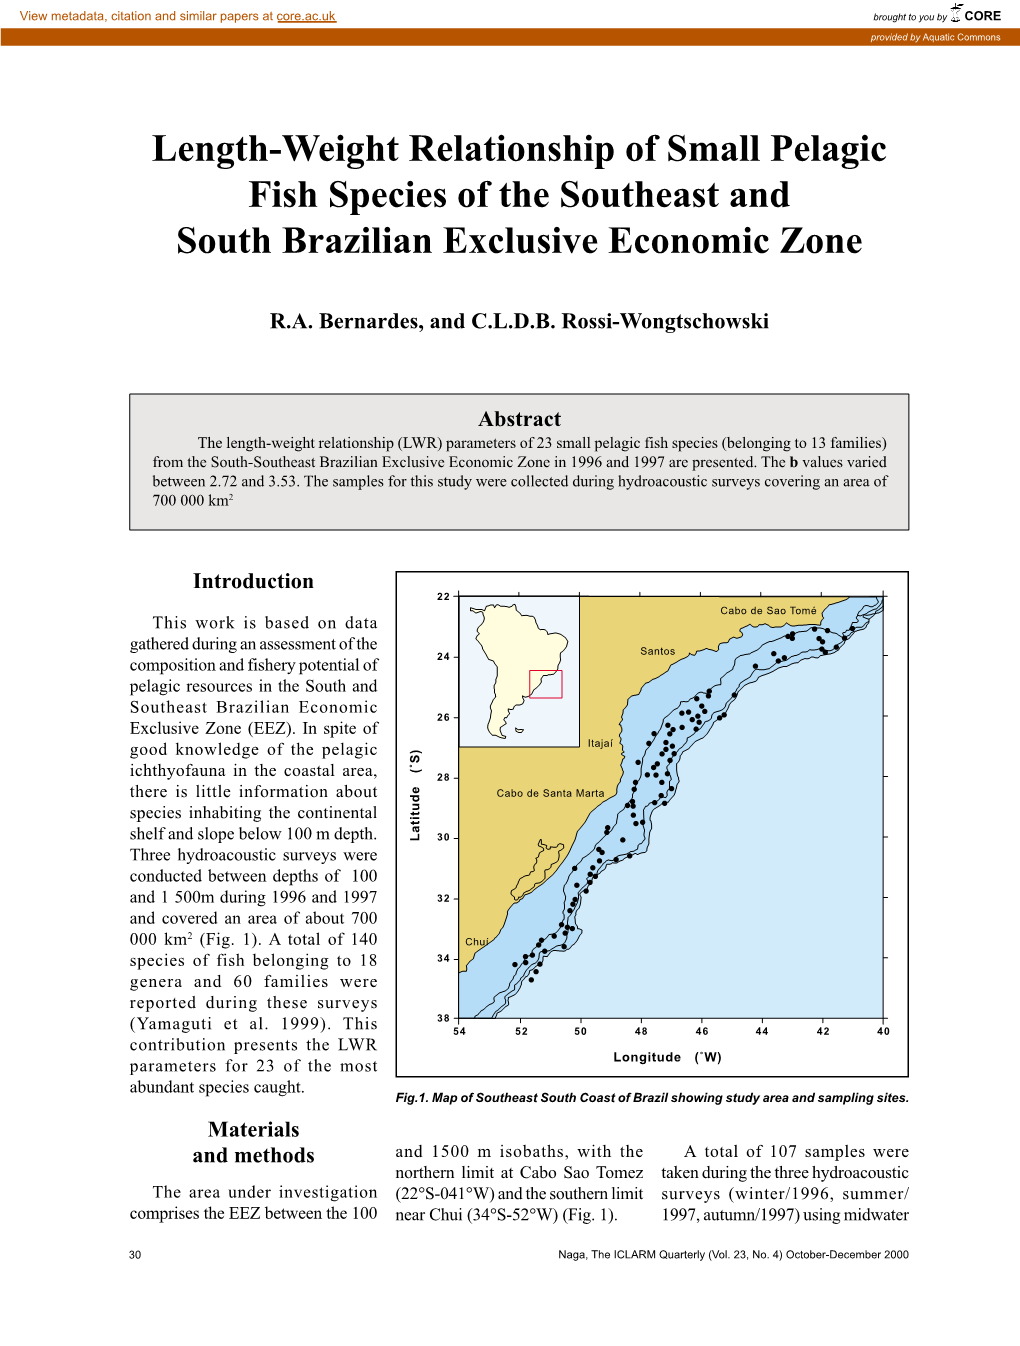 Length-Weight Relationship of Small Pelagic Fish Species of the Southeast and South Brazilian Exclusive Economic Zone